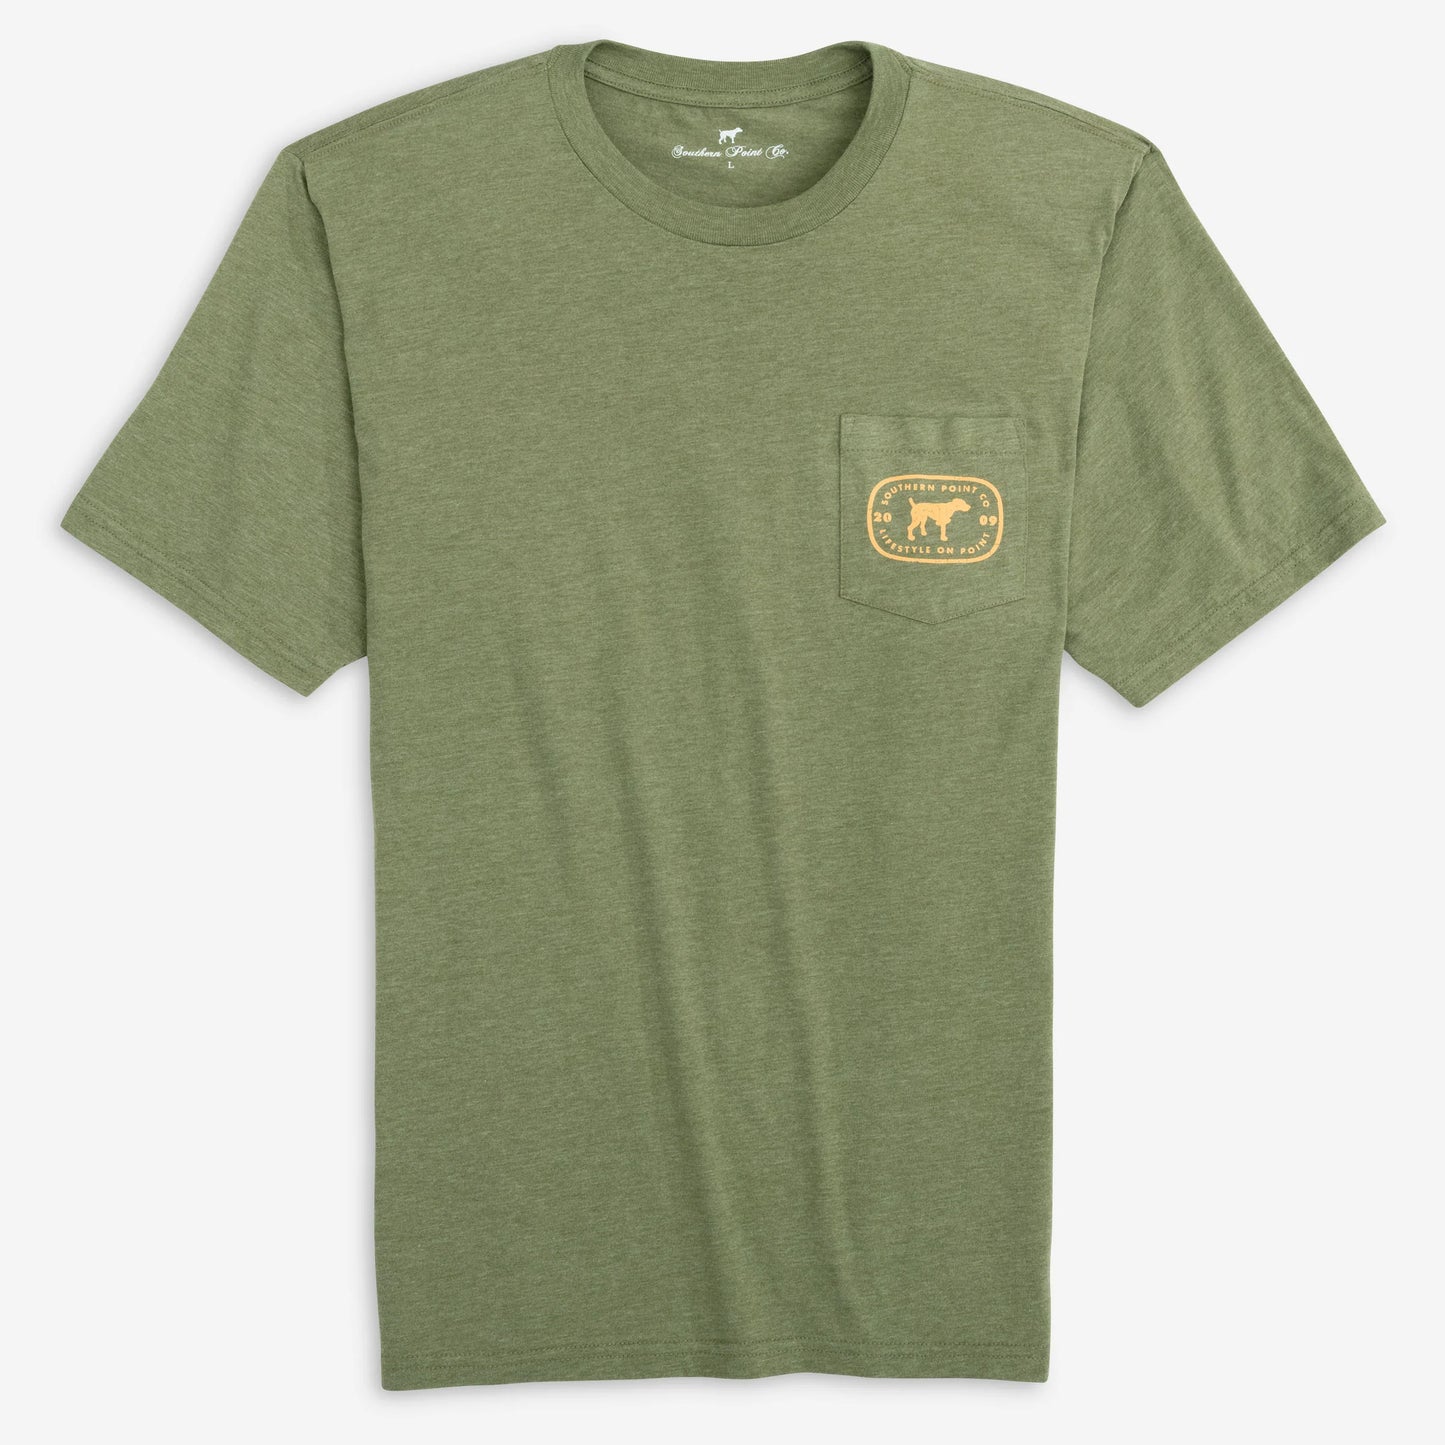 Southern Point- Vintage Trademark Tee